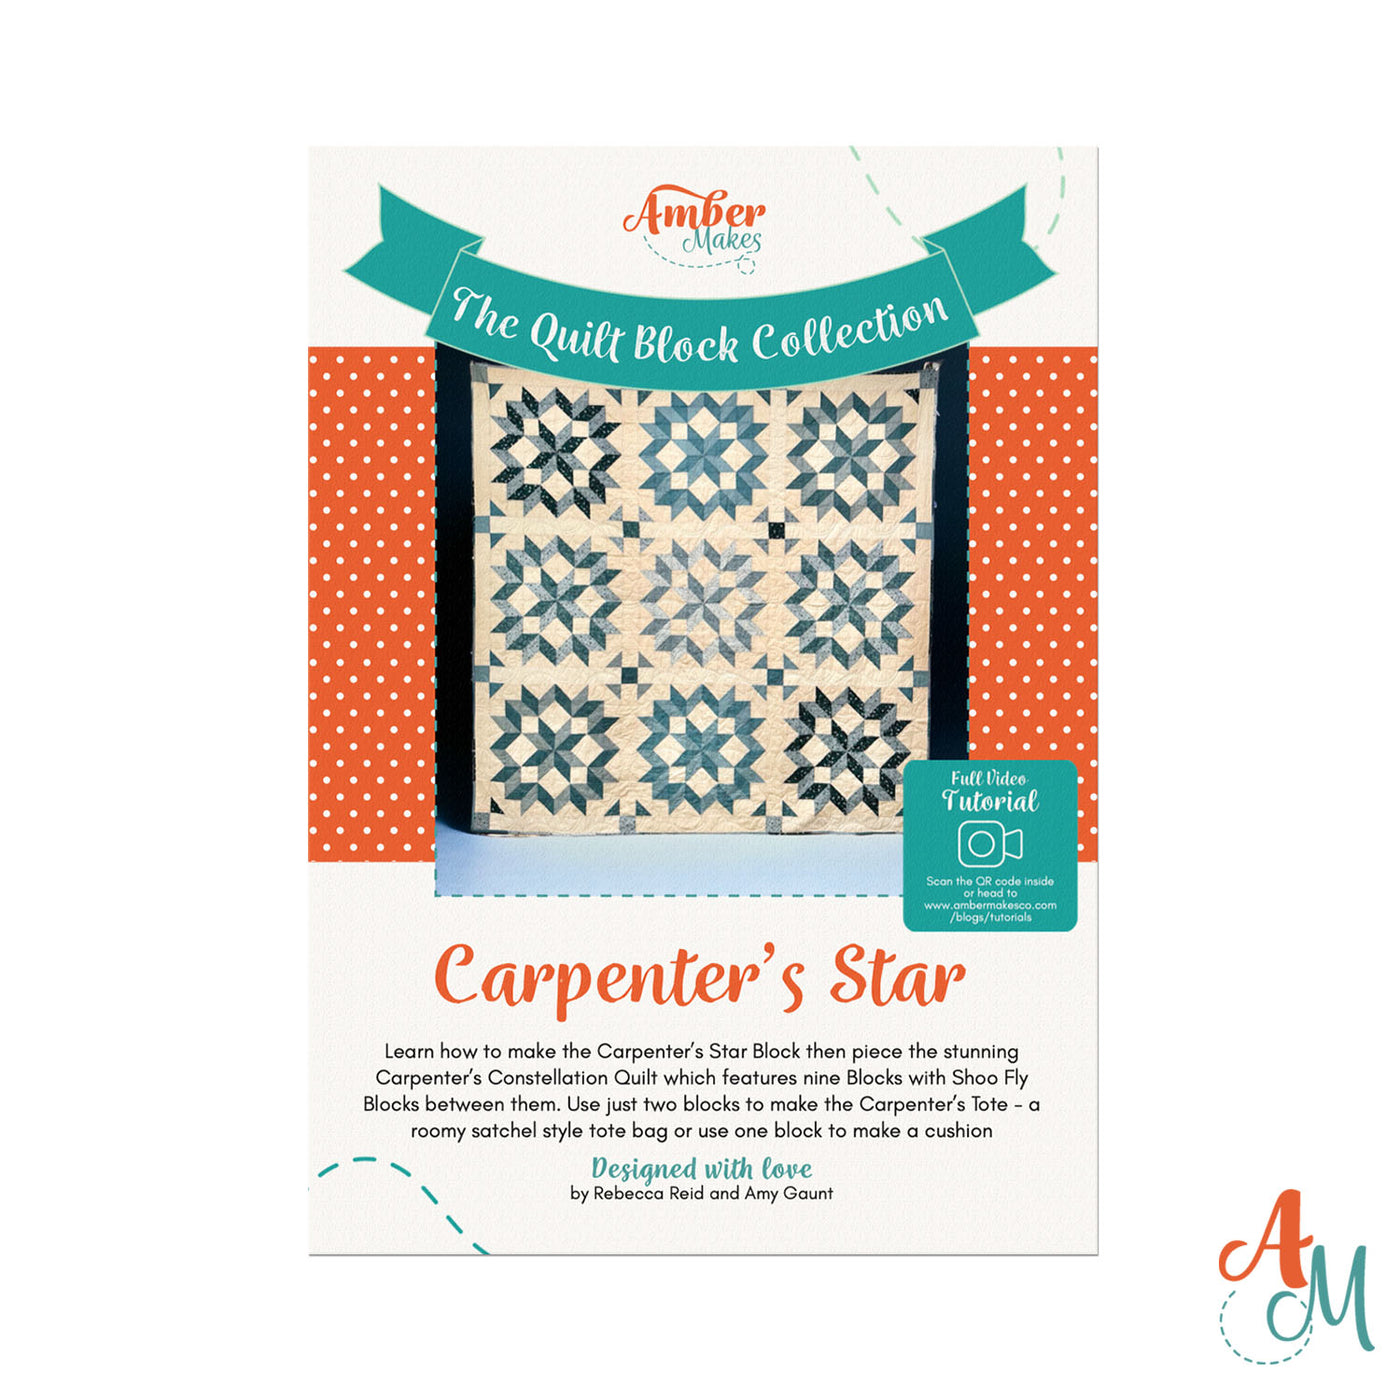 Quilt Block Collection – Carpenter's Star Constellation Quilt And Carpenter's Tote Instructions – PDF Download Instructions Booklet